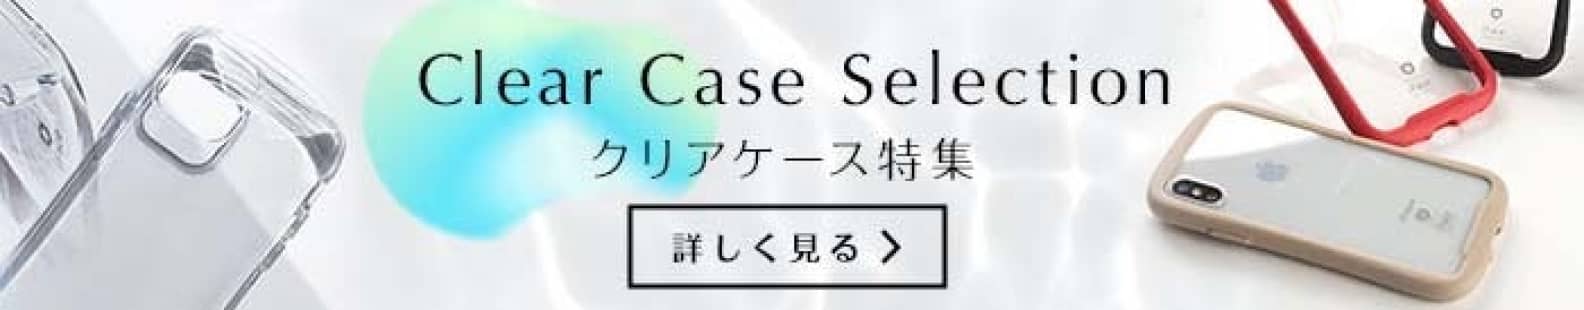 Clear Case Selection クリアケース特集